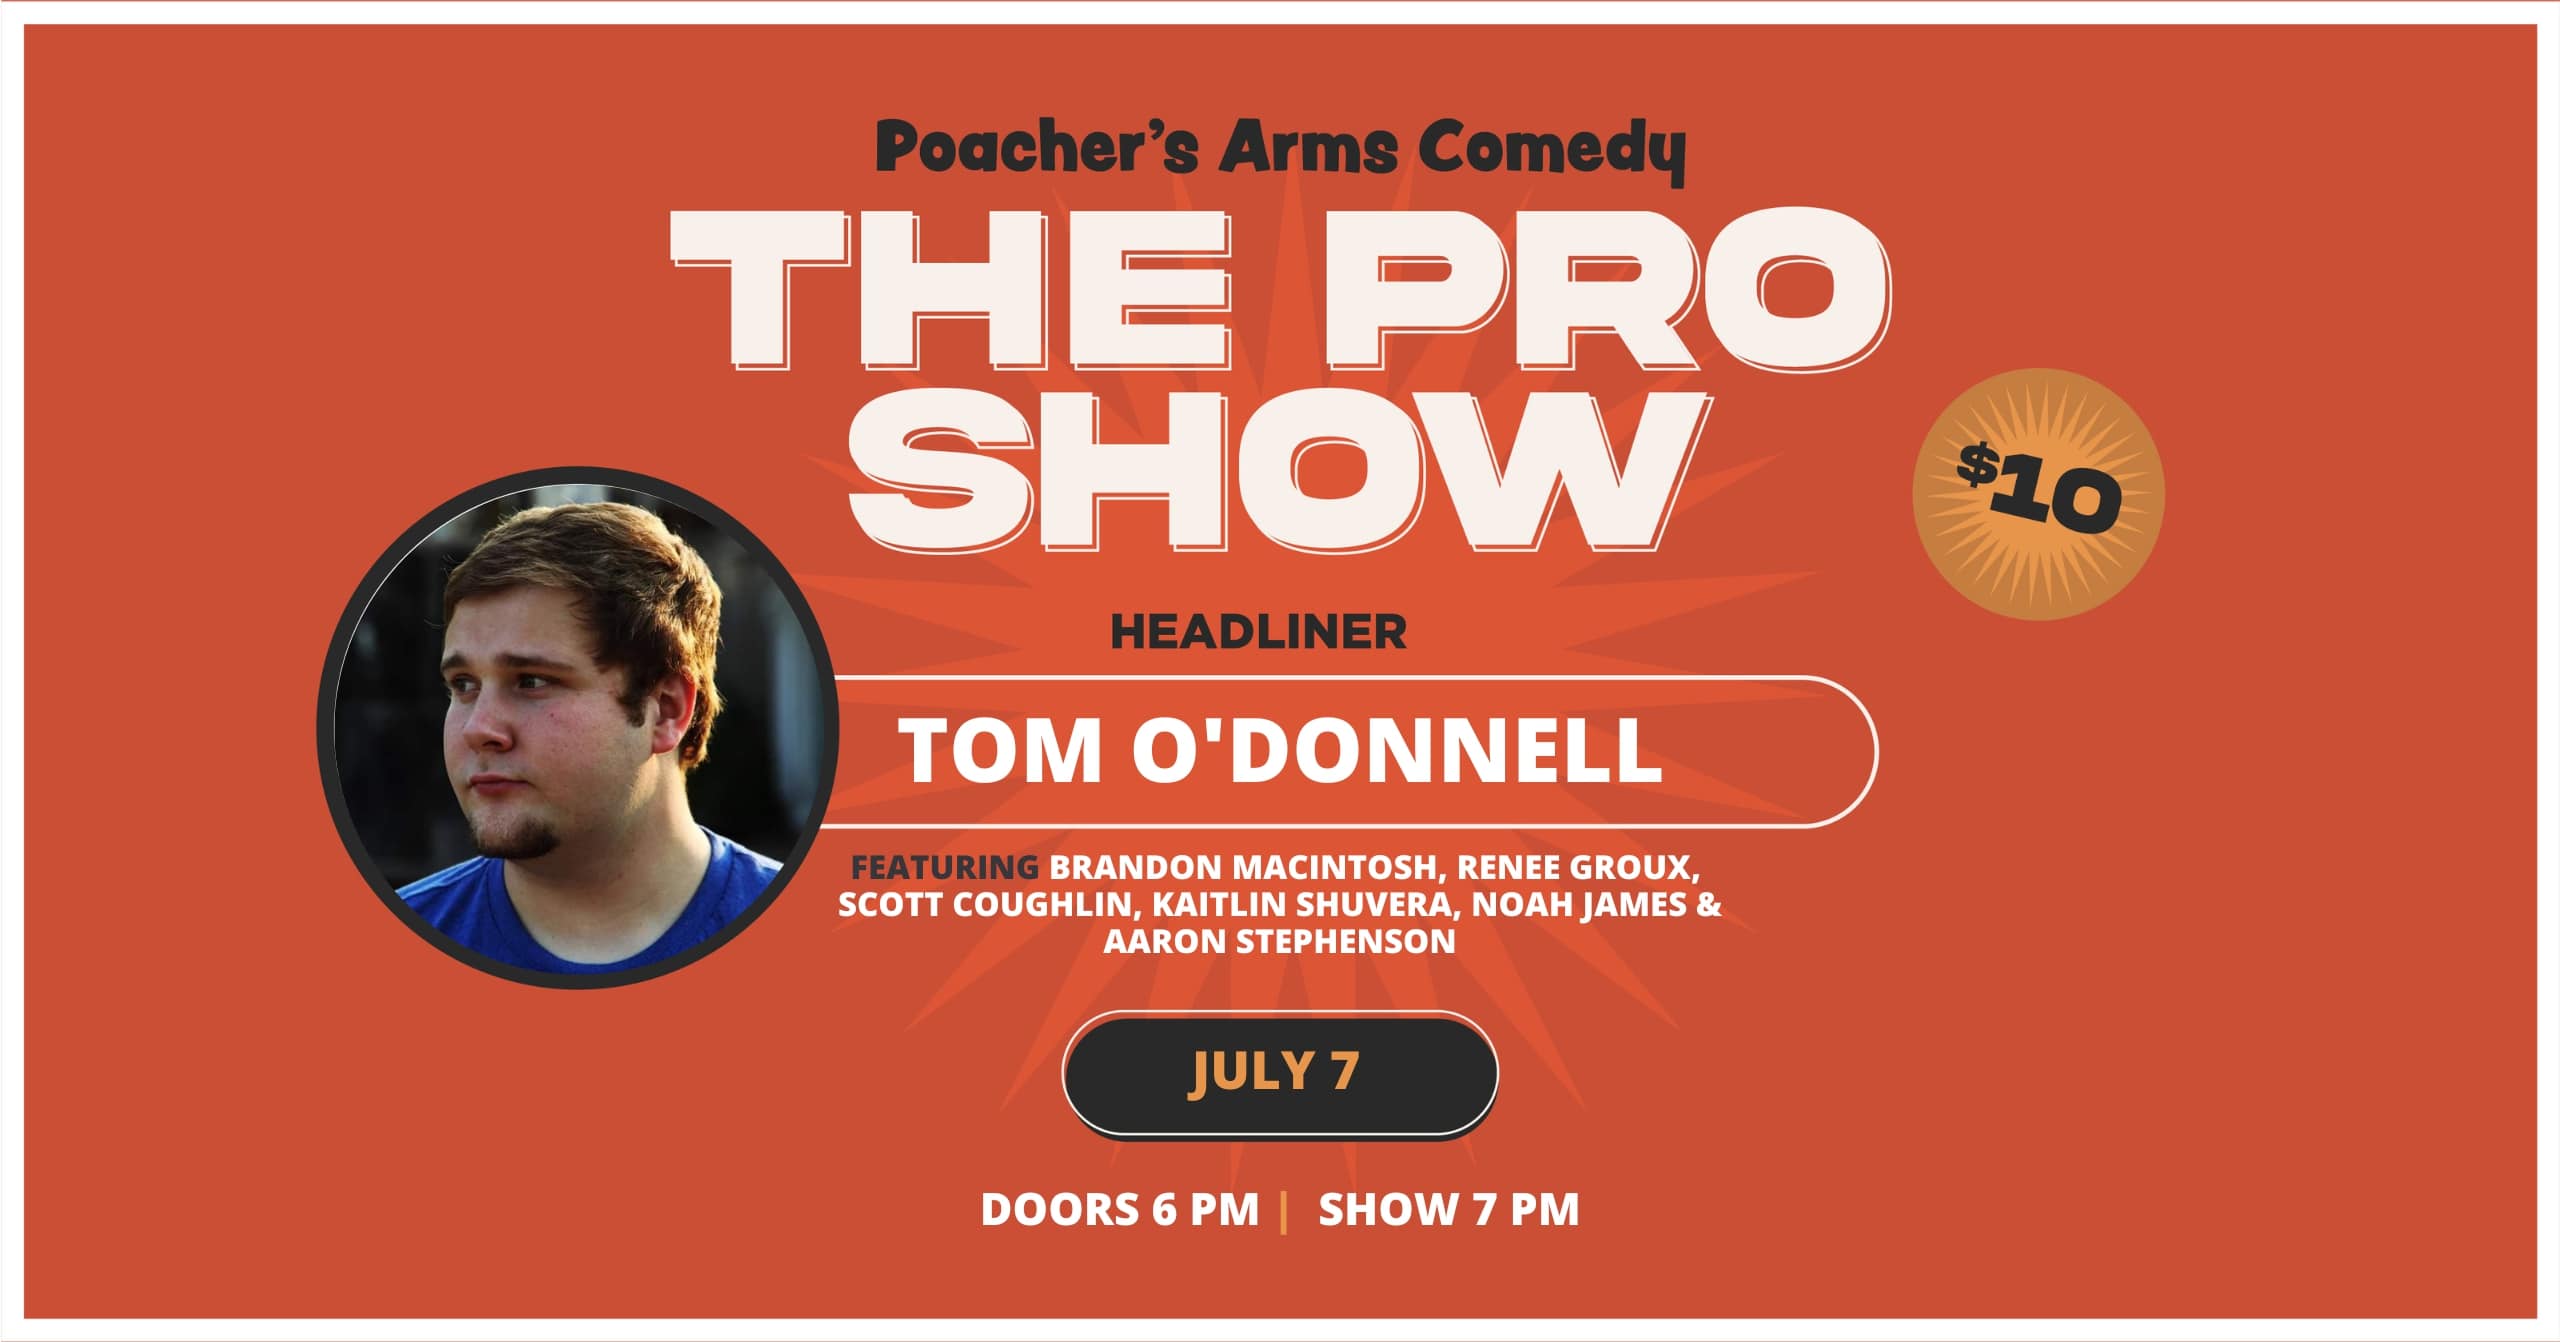 Comedy Night | The Pro Show @ Poachers Arms (7pm Show)